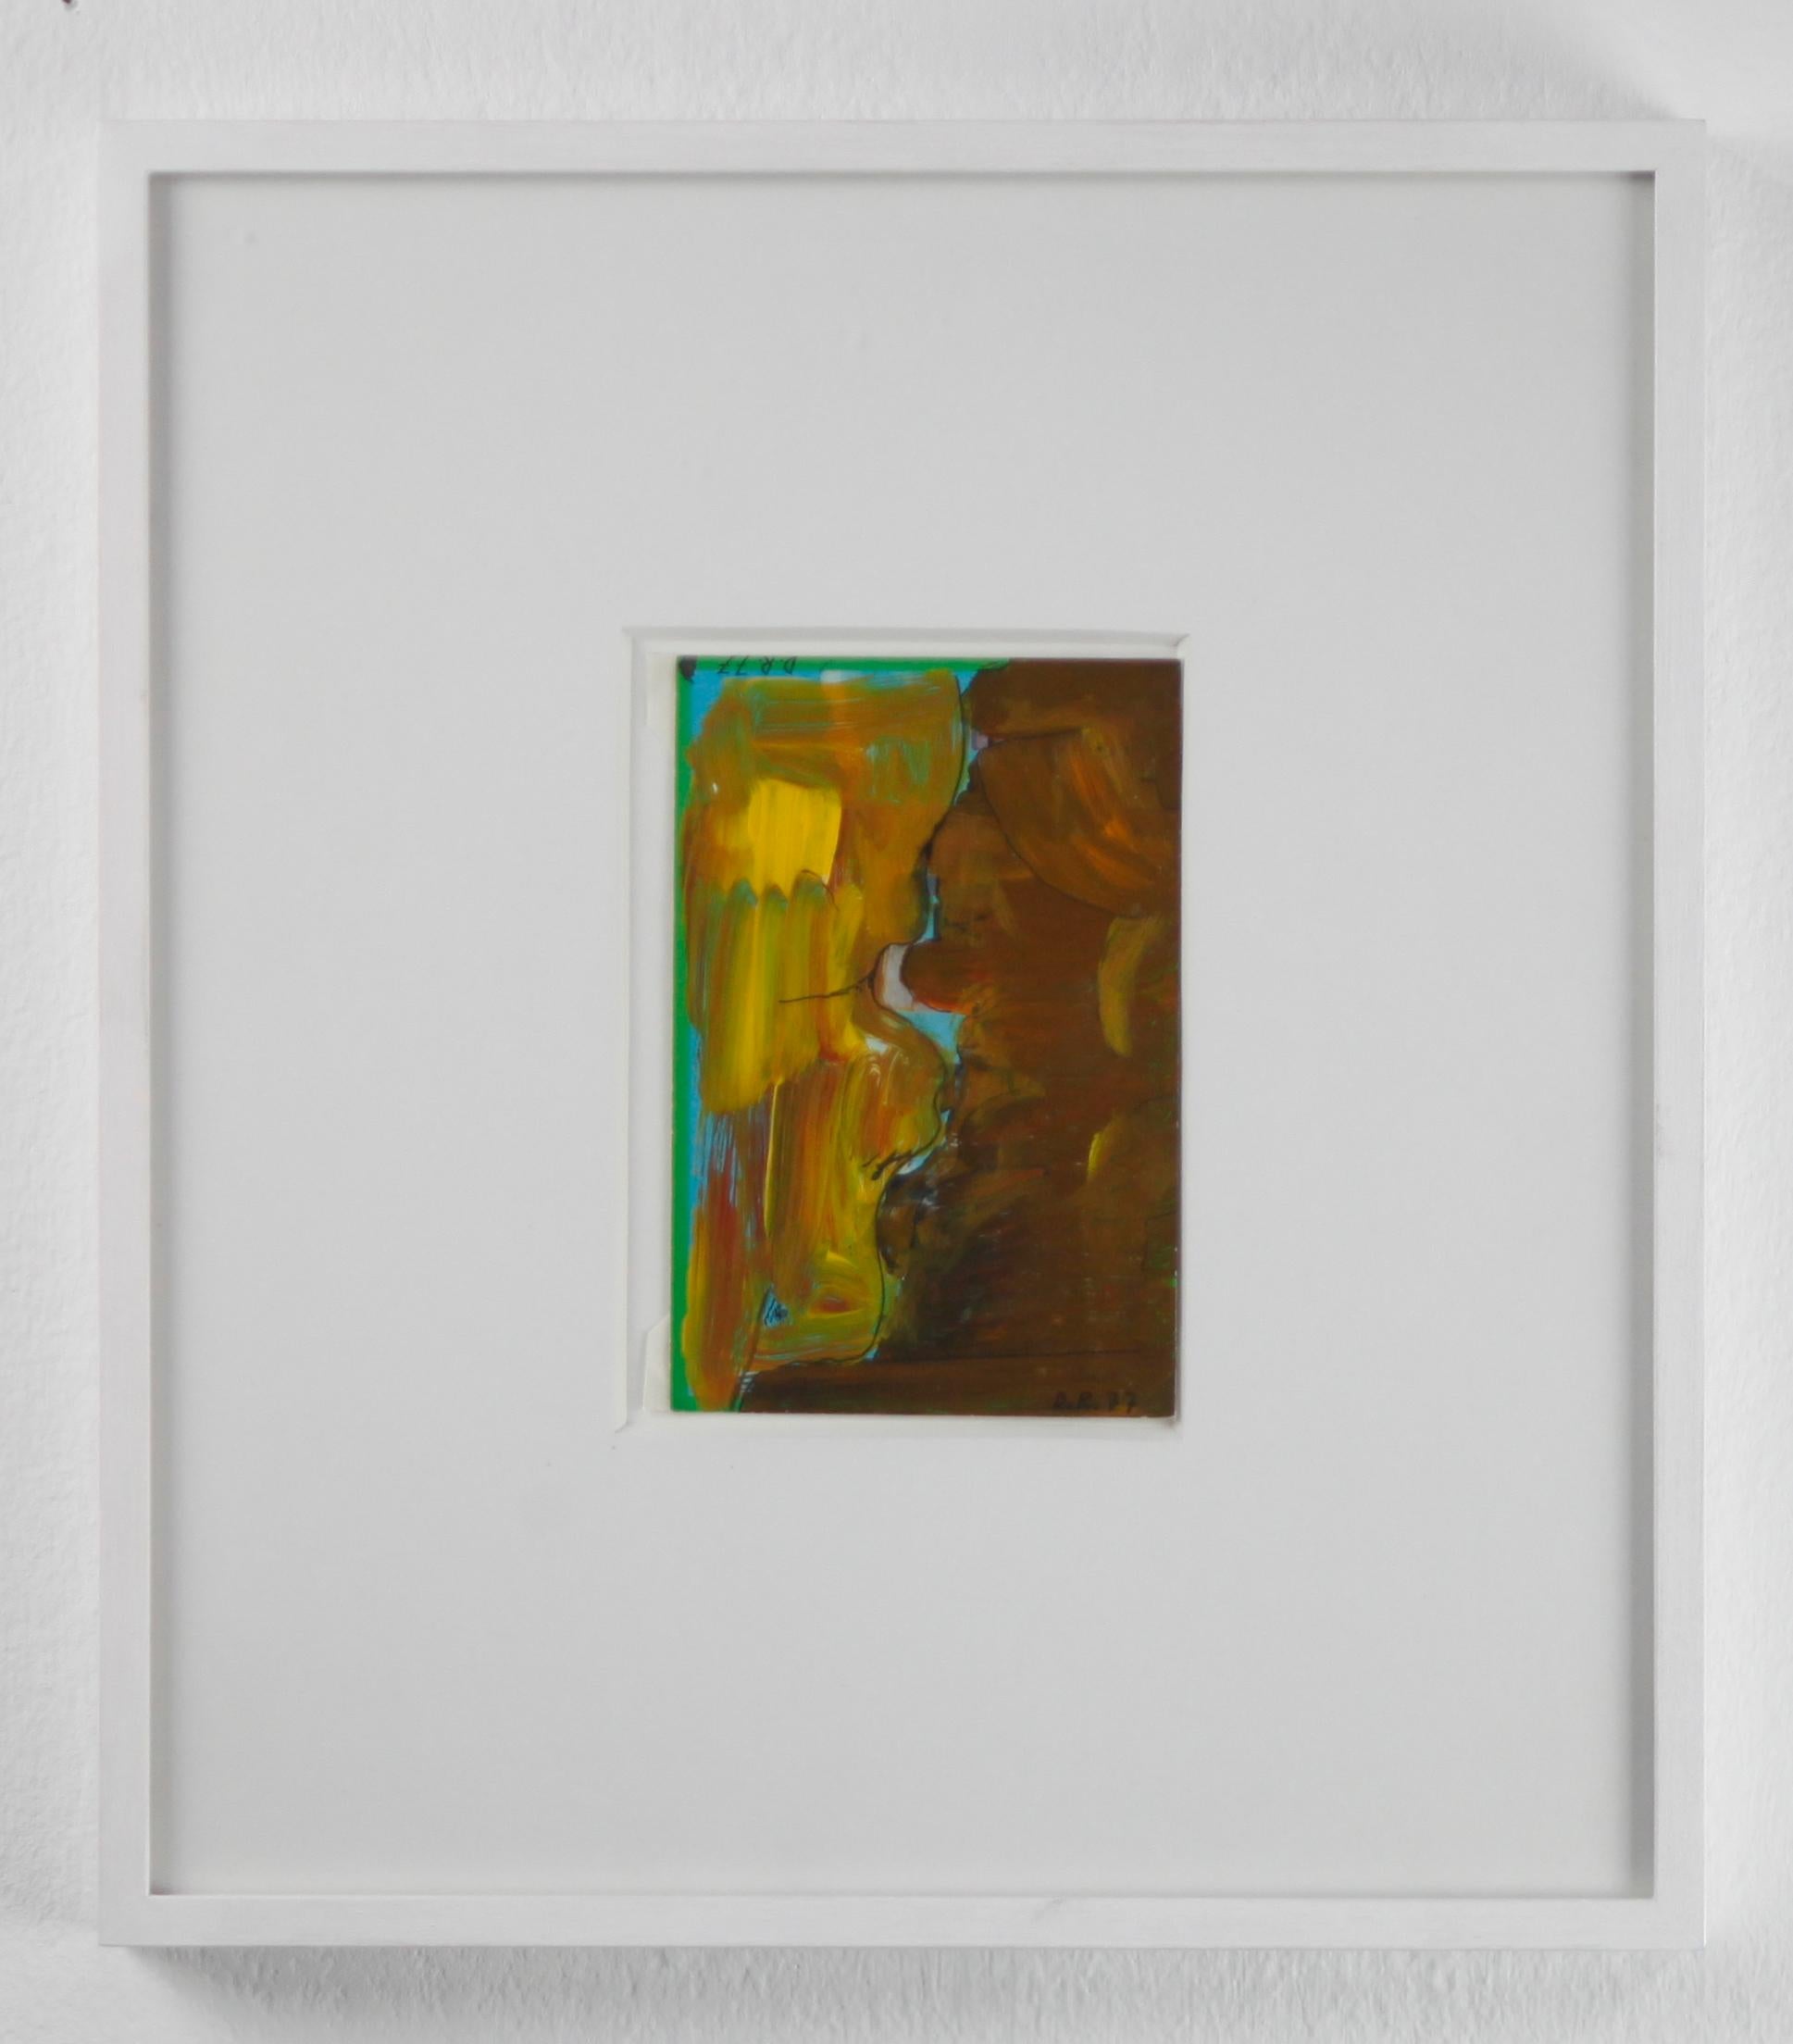 "Untitled", framed Postcard, oil and ink, monogrammed by Roth